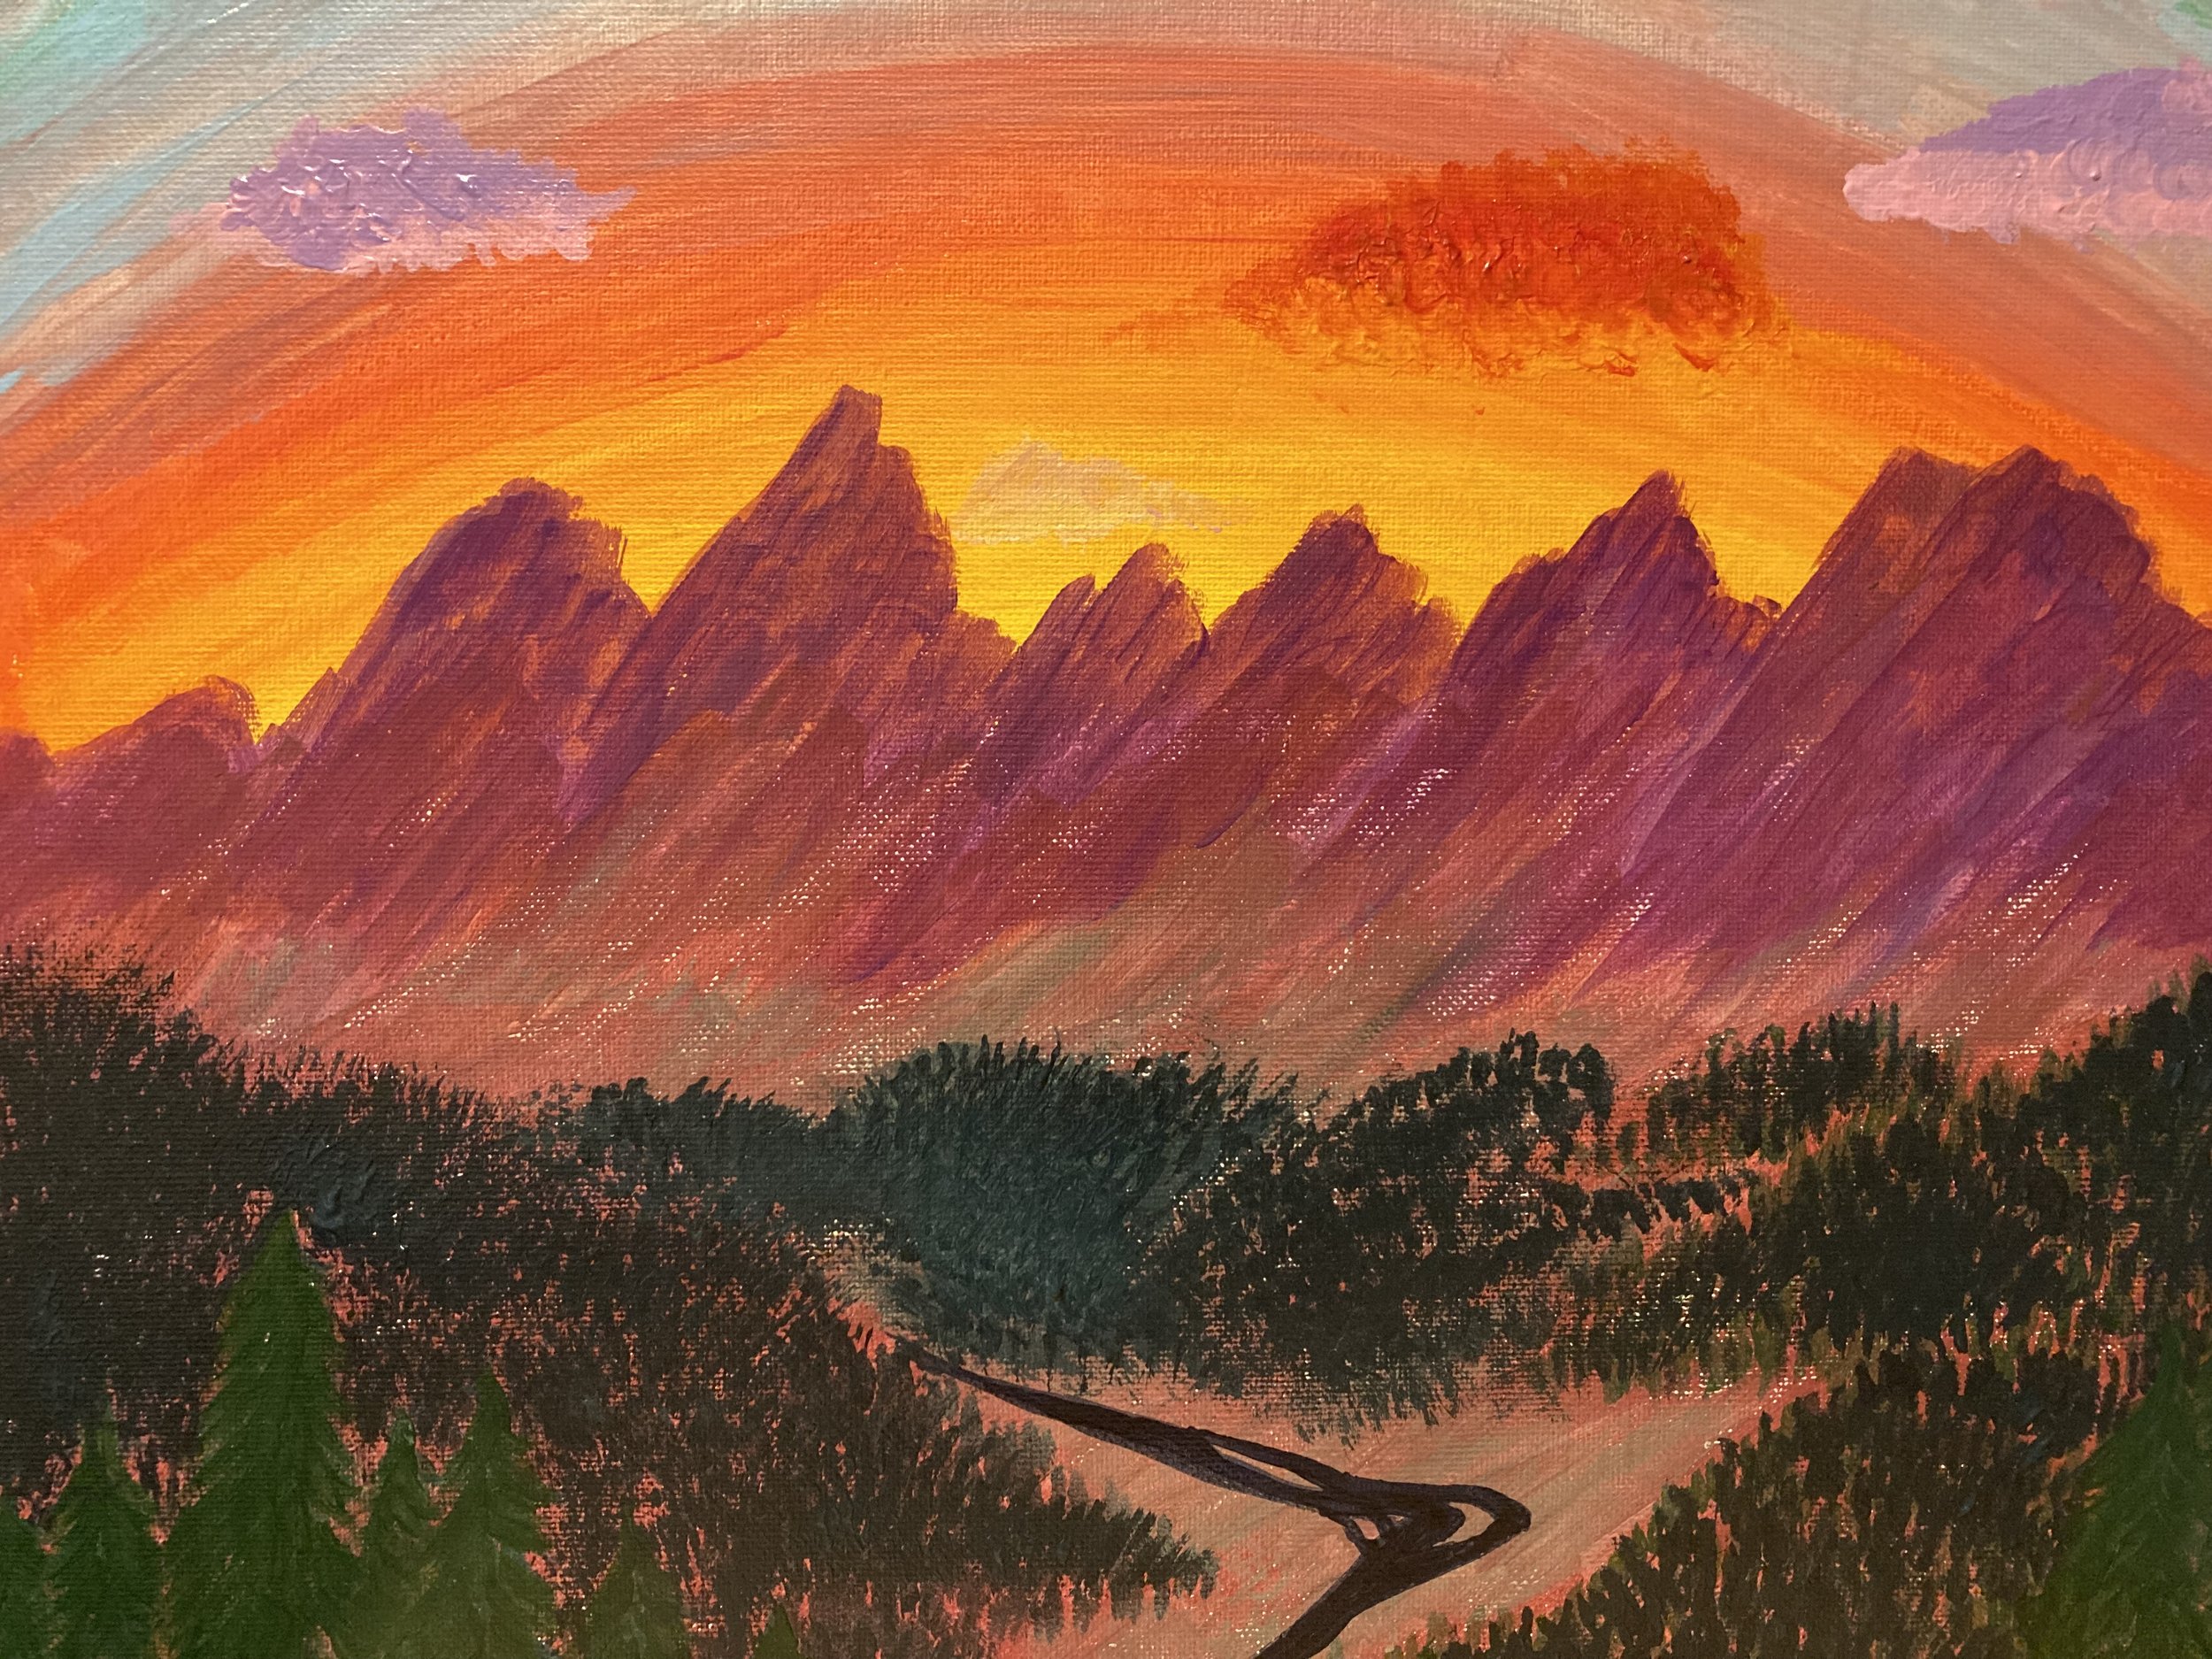  Painting of Tetons viewed from the east with the sunset behind the peaks and a river running at the base of the mountains.  